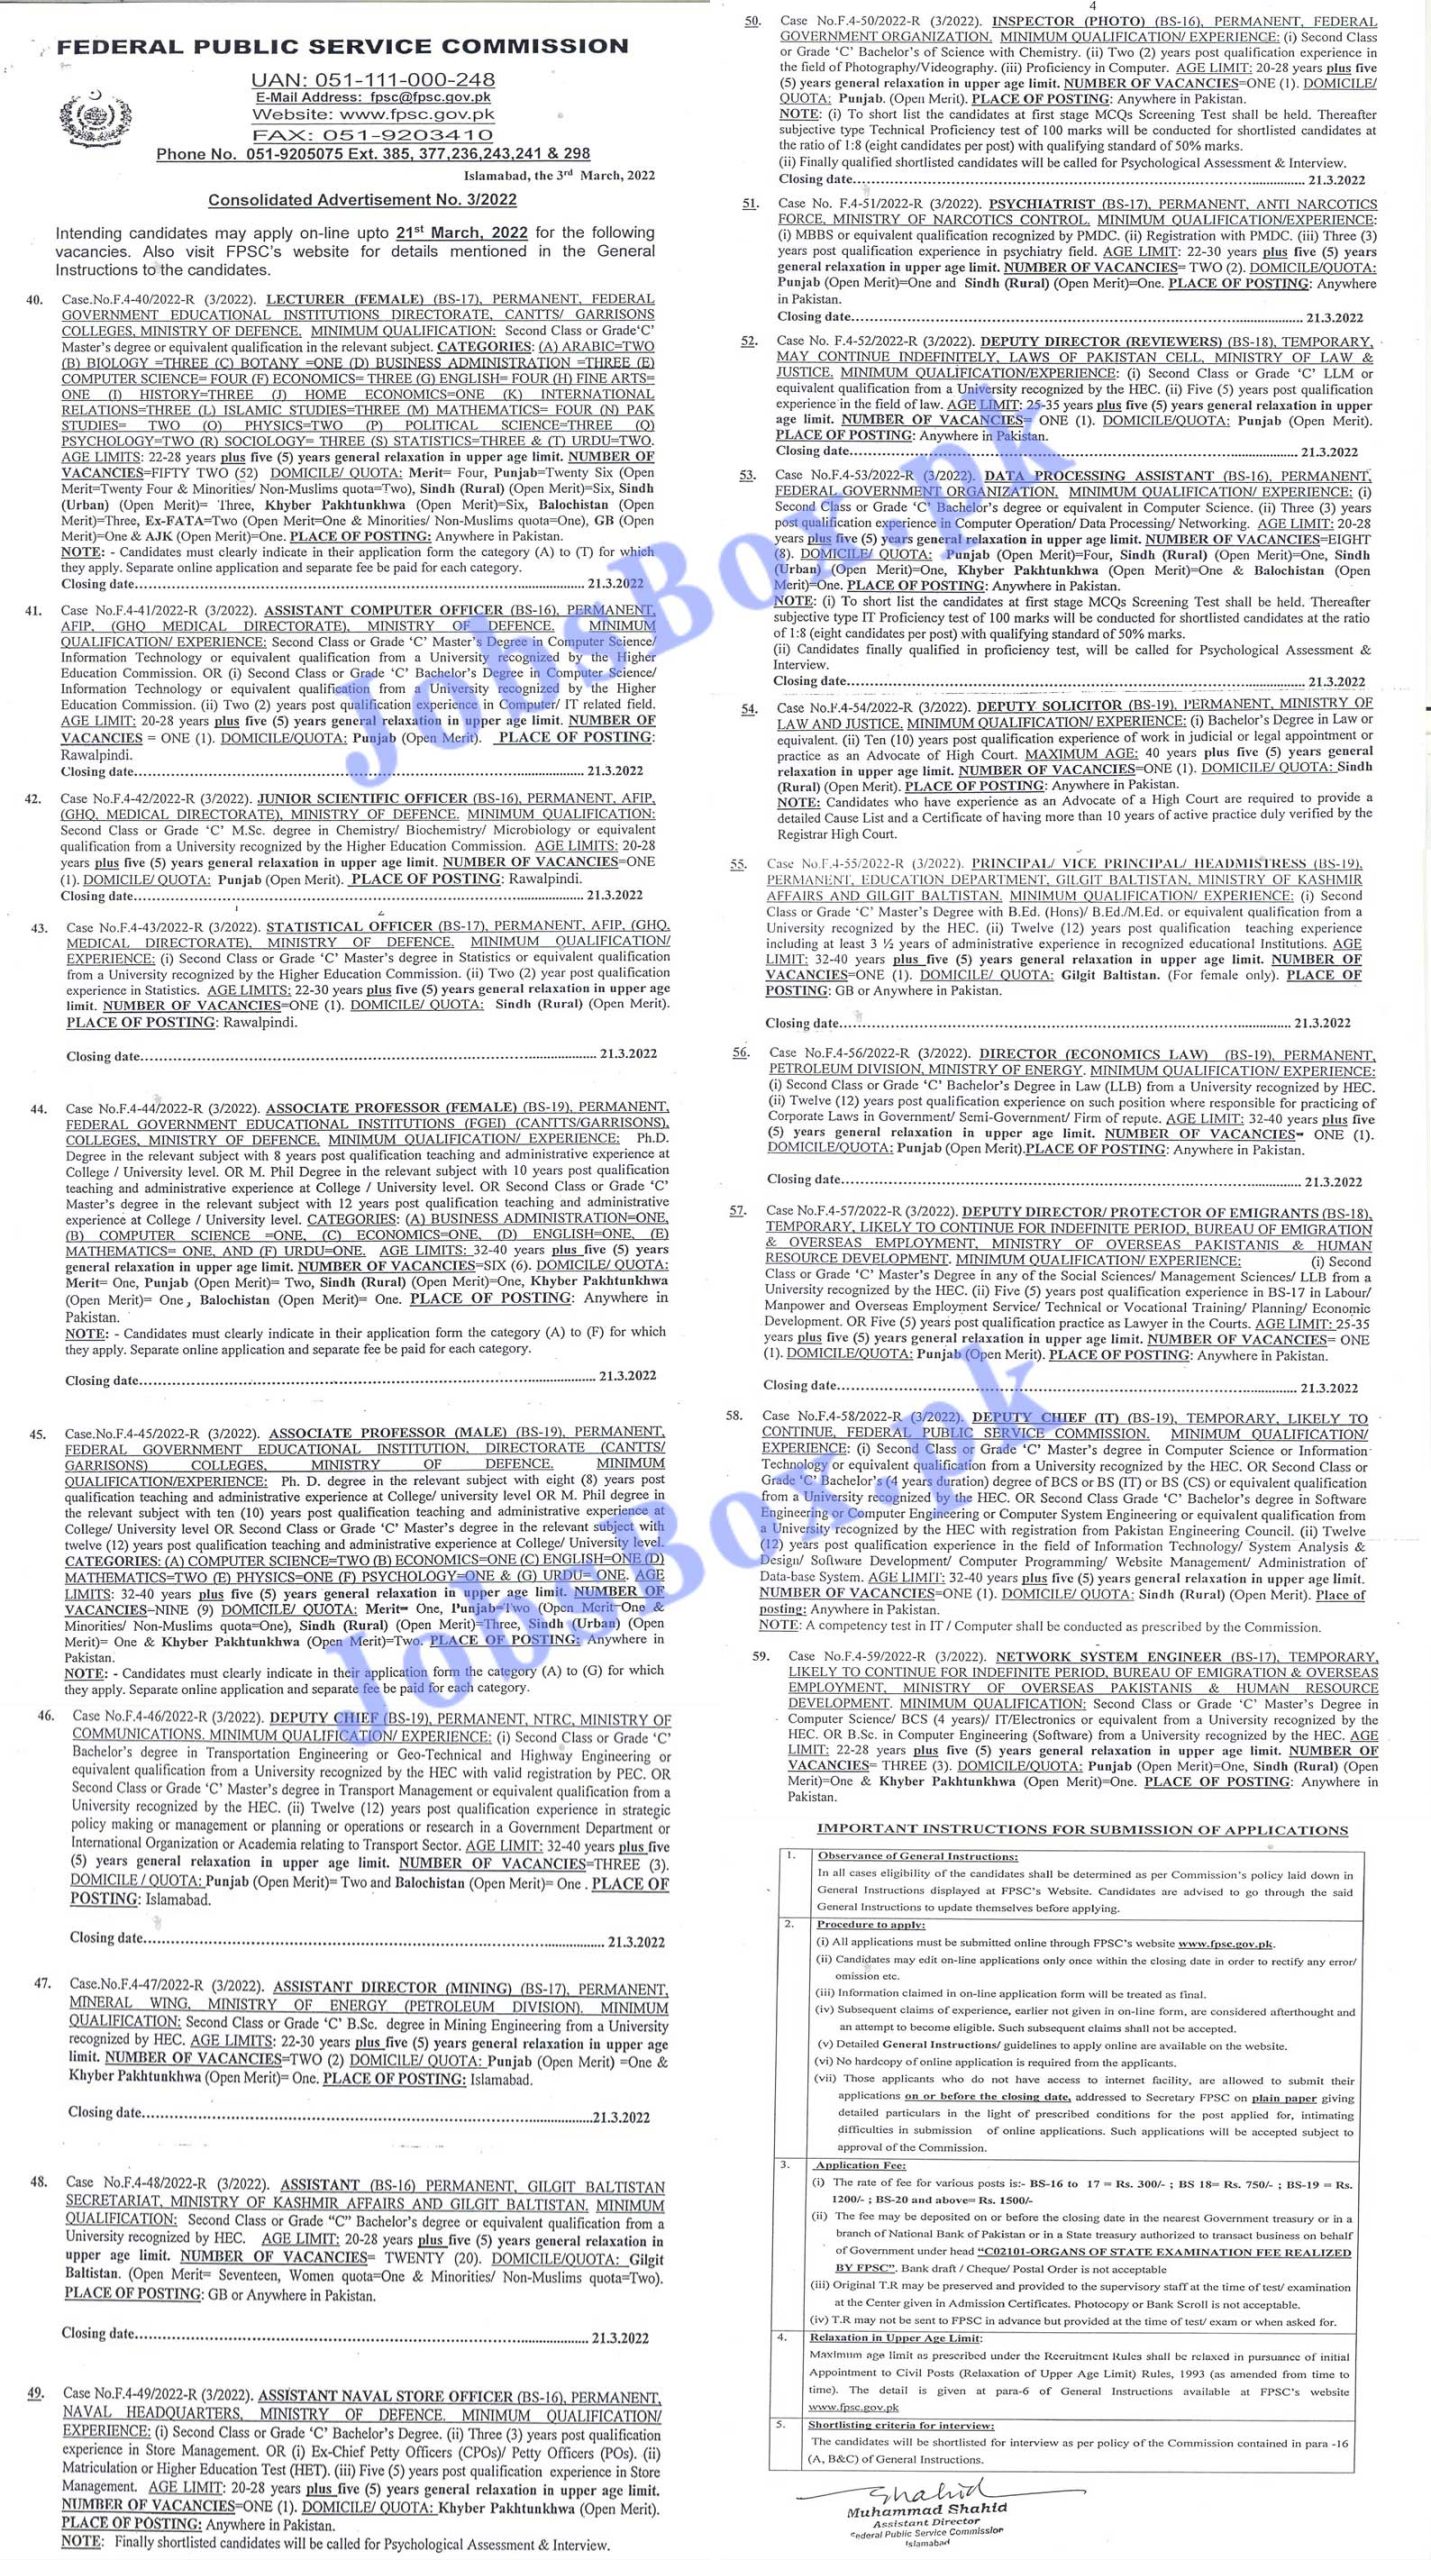 FPSC Jobs 2022 Consolidated Advertisement No. 03/2022